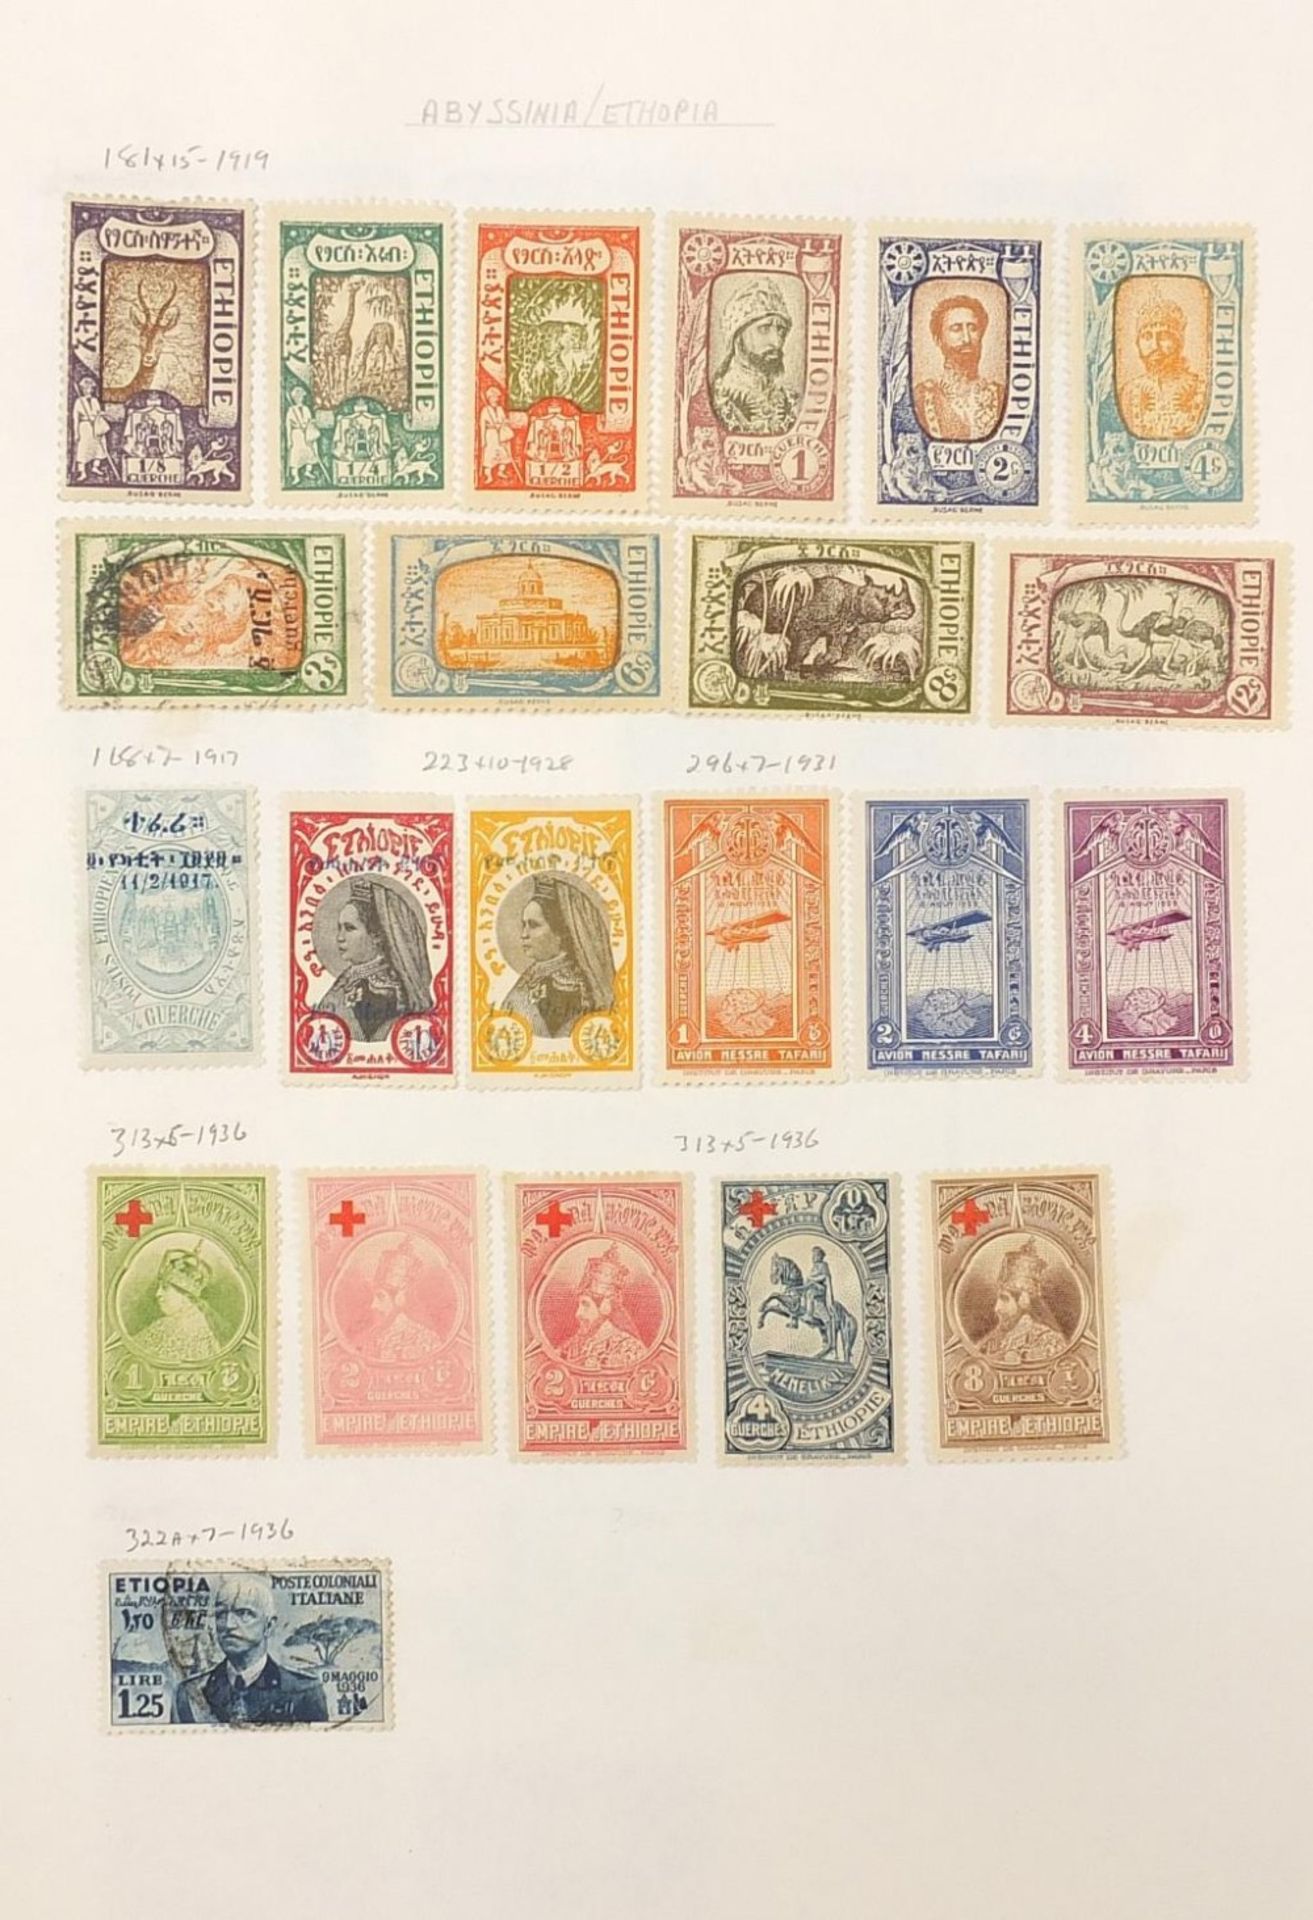 Extensive collection of antique and later world stamps arranged in albums including Brazil, - Image 29 of 52